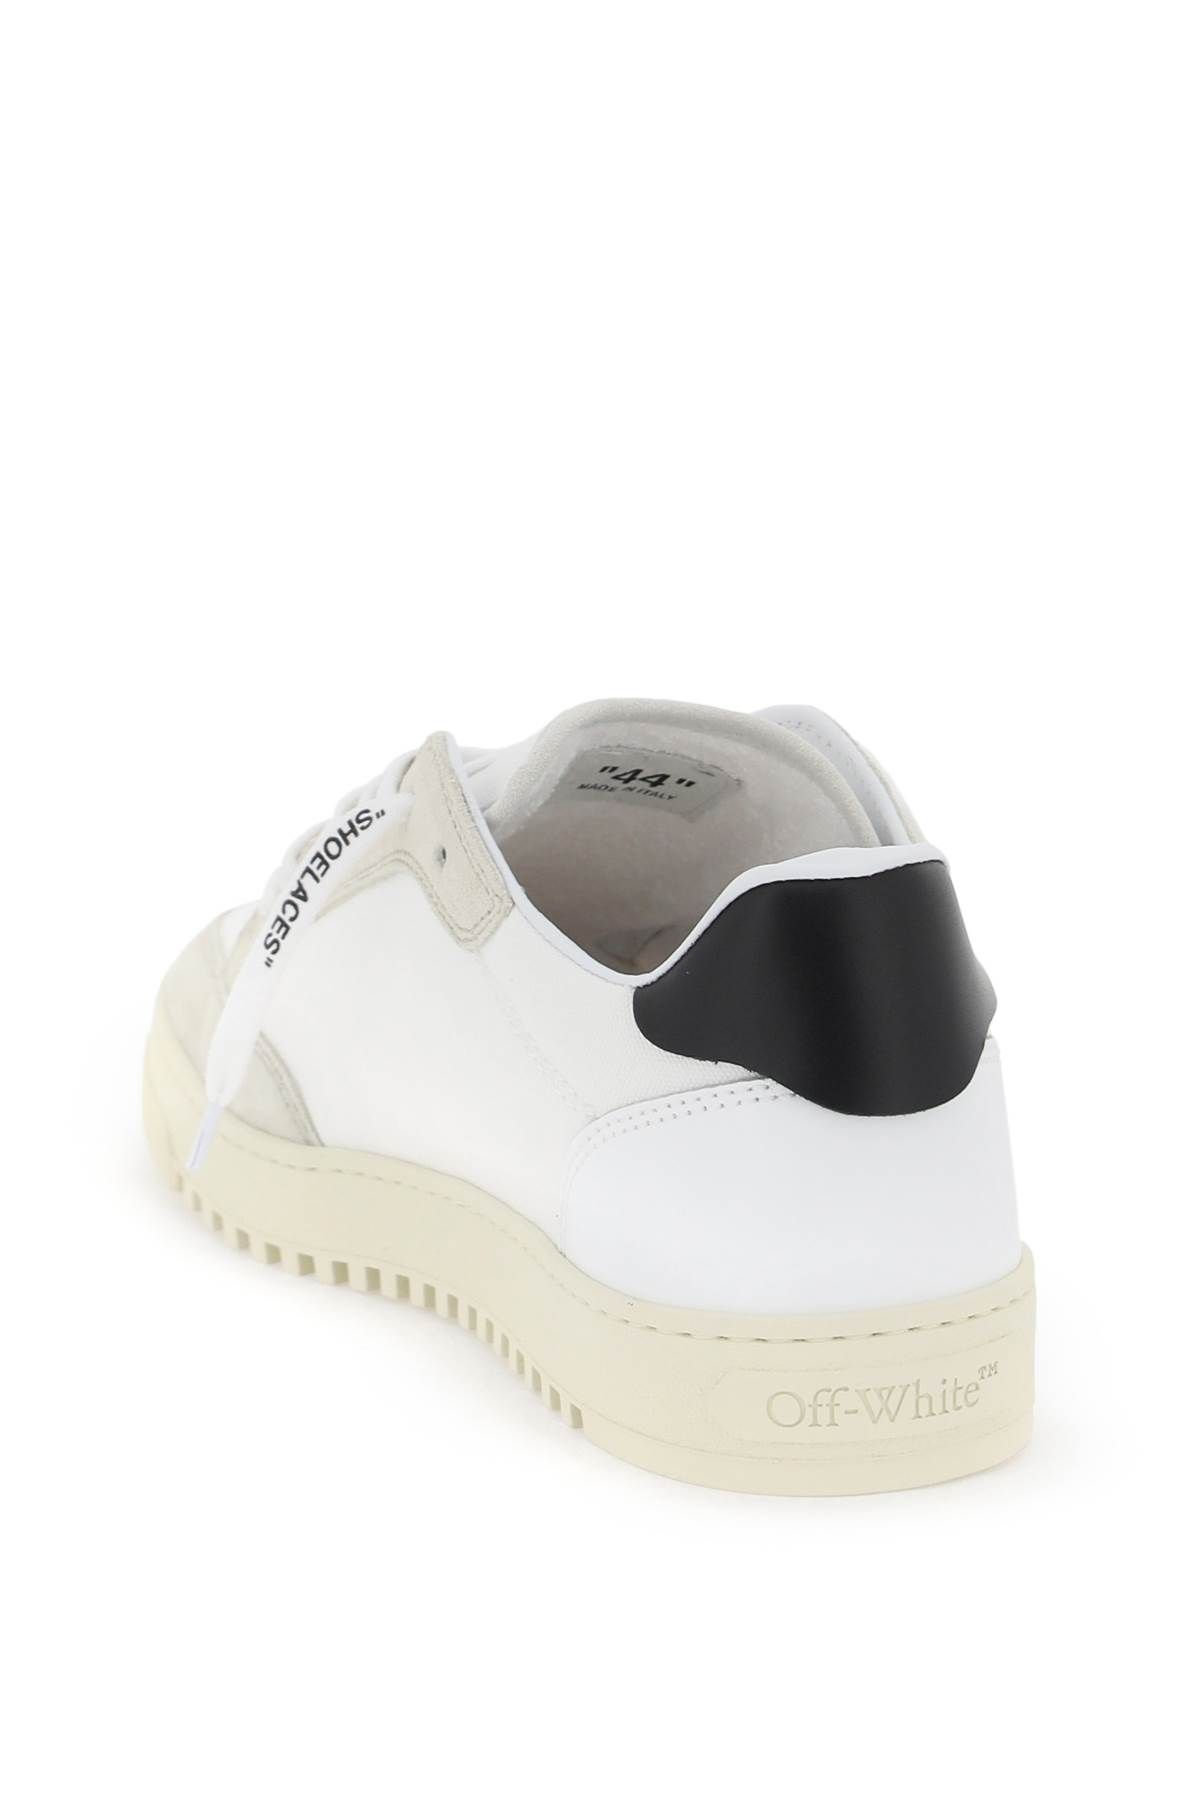 Shop Off-white 5.0 Sneakers In White,beige